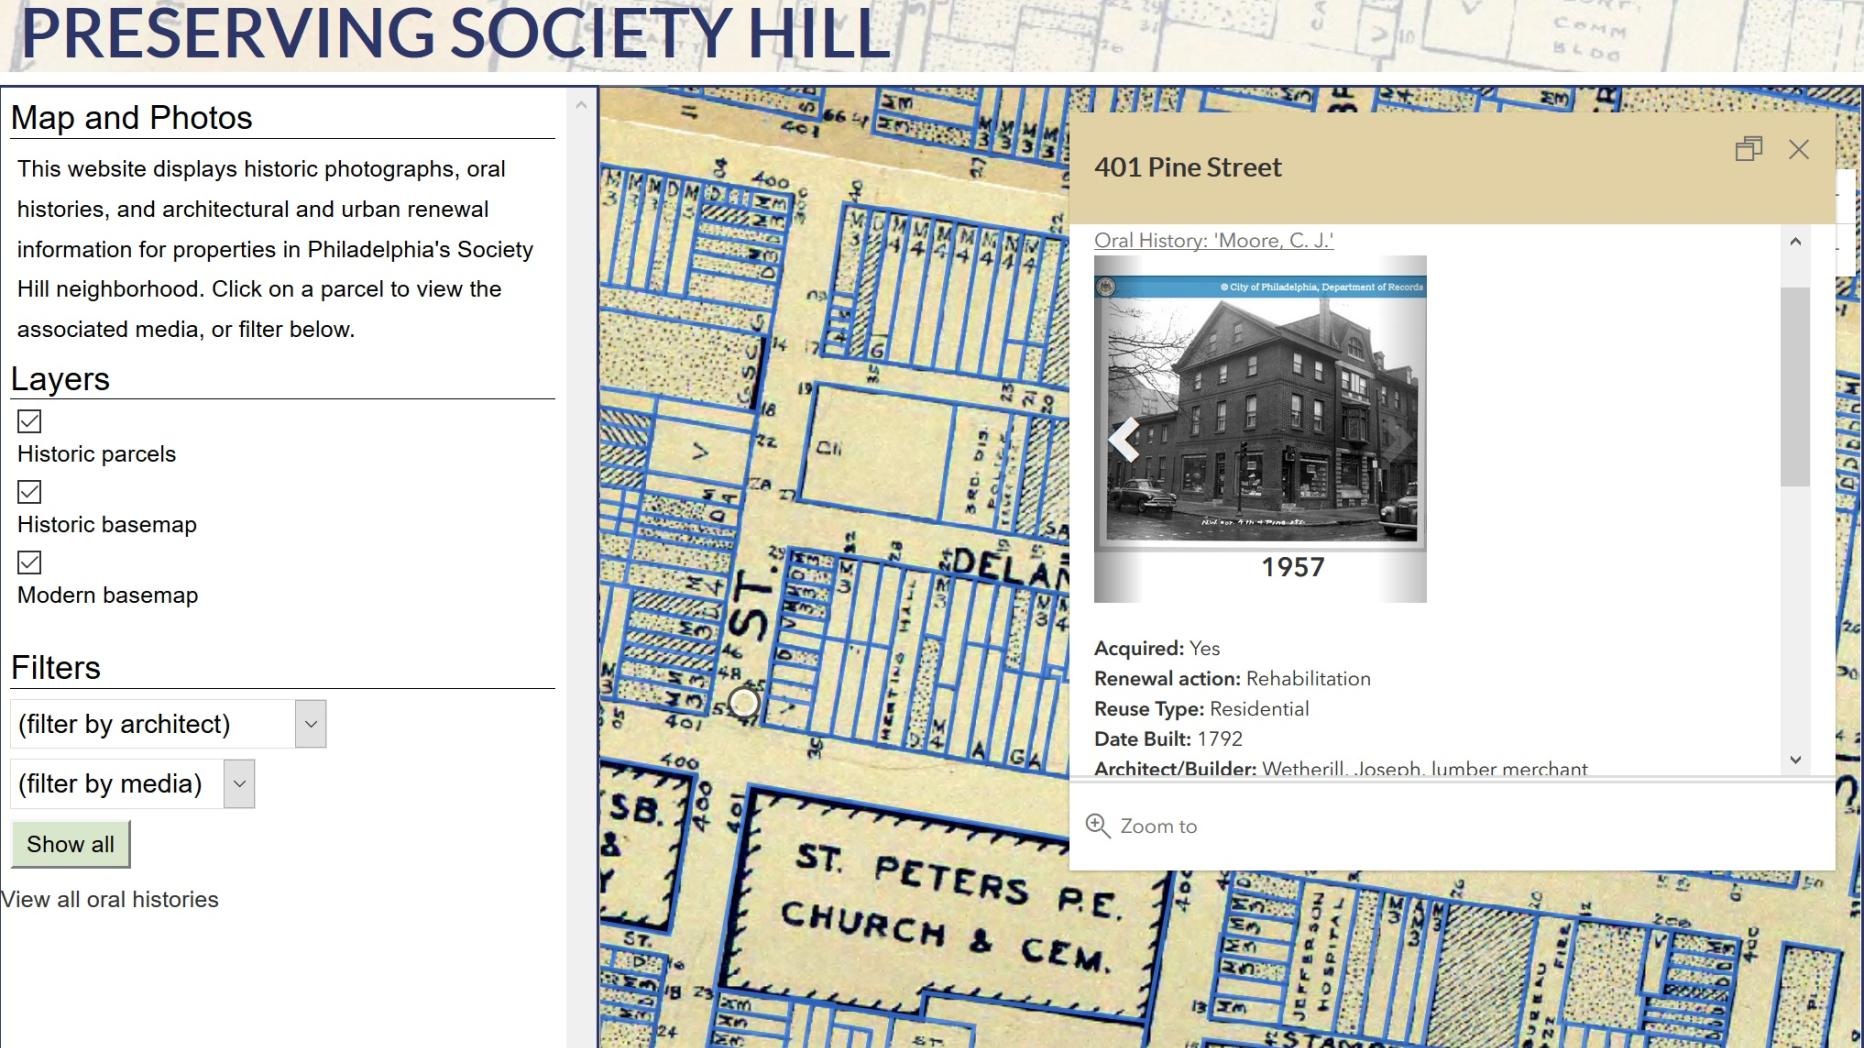 Preserving Society Hill: Sites and Stories of Urban Renewal in a Philadelphia Neighborhood